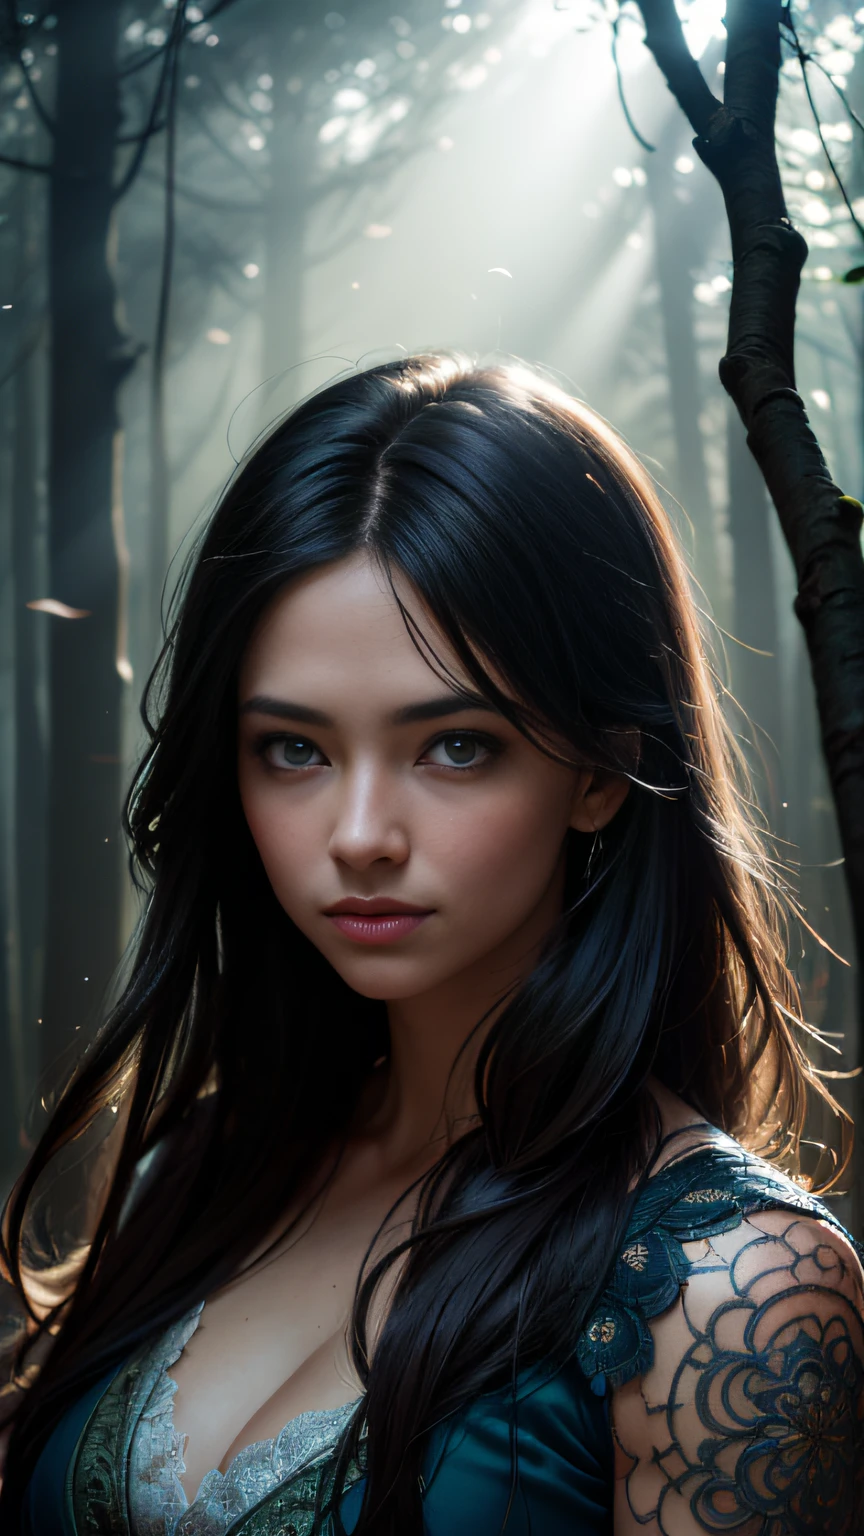 epic realistic, (dark shot:1.4), 80mm, Create a portrait of a woman with long, dark hair. She has a mysterious expression, gazing at the viewer with a slight tilt of her head. She is simply dressed, with an arm wrapped around a tree branch that also resembles a brain cell. The background features a forest of blue, impressionistic leaves, with an eerie white light shining through and a gradient shadow on the top part of the woman's face. Use a backlighting effect to add depth to the image. impressionistic painting style, john singer sarget, anders zorn, blue pallette, wider show with more background and forest, (natural skin texture, hyperrealism, soft light, sharp:1.2), soft light, sharp, exposure blend, medium shot, bokeh, (hdr:1.4), high contrast, (cinematic, teal and orange:0.85), (muted colors, dim colors, soothing tones:1.3), low saturation, (hyperdetailed:1.2), (noir:0.4), (intricate details:1.12), hdr, (intricate details, hyperdetailed:1.15), faded, (neutral colors:1.2), art, (hdr:1.5), (muted colors:1.1), (pastel:0.2), hyperdetailed, (artstation:1.4), warm lights, dramatic light, (intricate details:1.2), vignette, complex background, rutkowski,